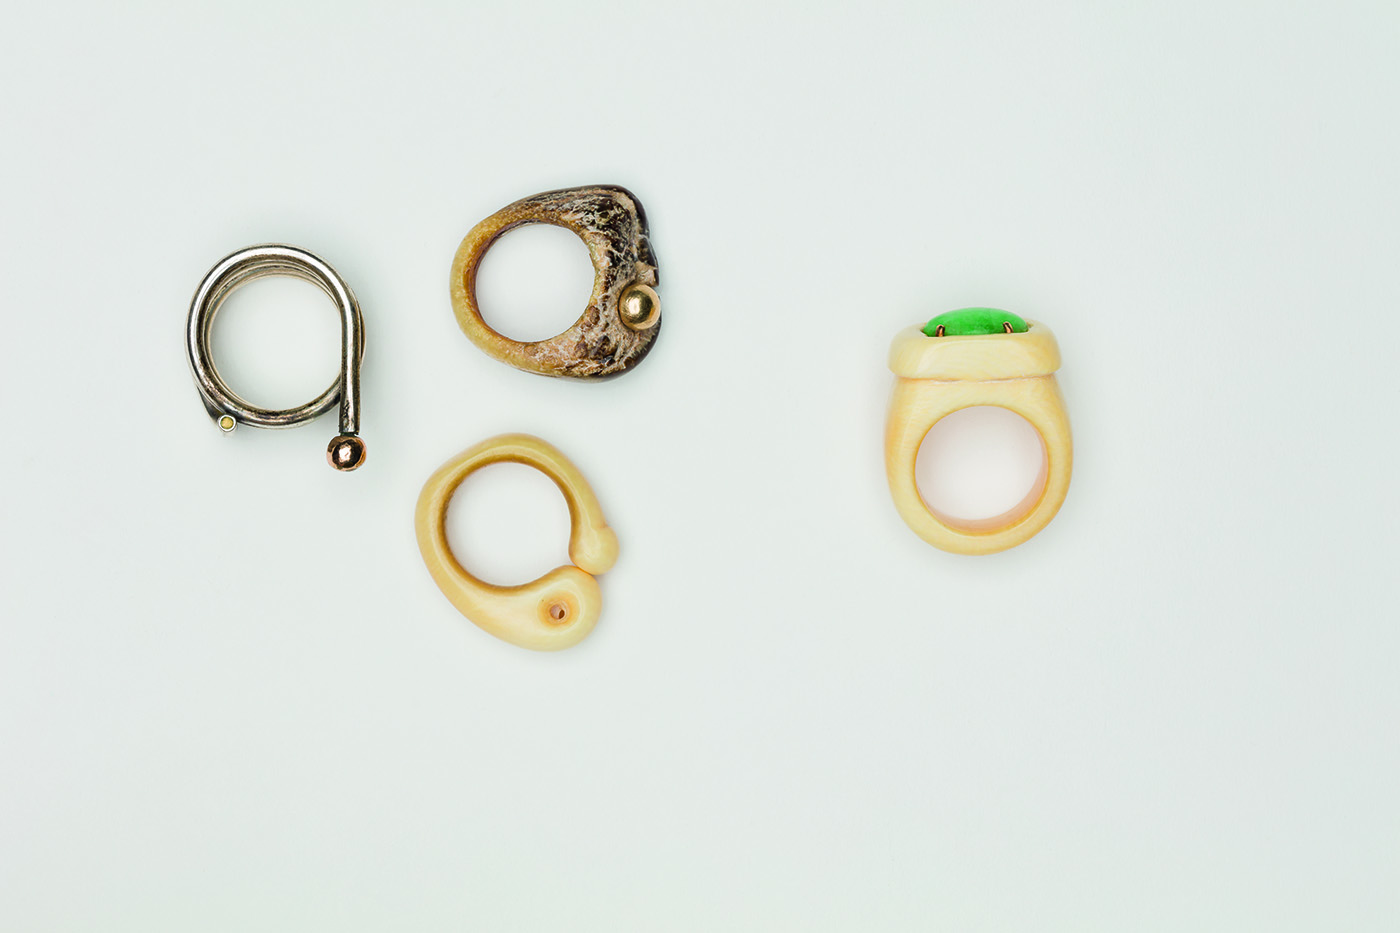  Clockwise from left:   Untitled , 1975, Silver and gold, 1 x 1 1/4 inches   Untitled , 1980, Walrus tusk, 1 x 1 inches   Untitled , 1978, Ivory, jade and gold, 1 x 1 1/4 inches   Untitled , 1978, Ivory 7/8 x 1 1/8 inches 